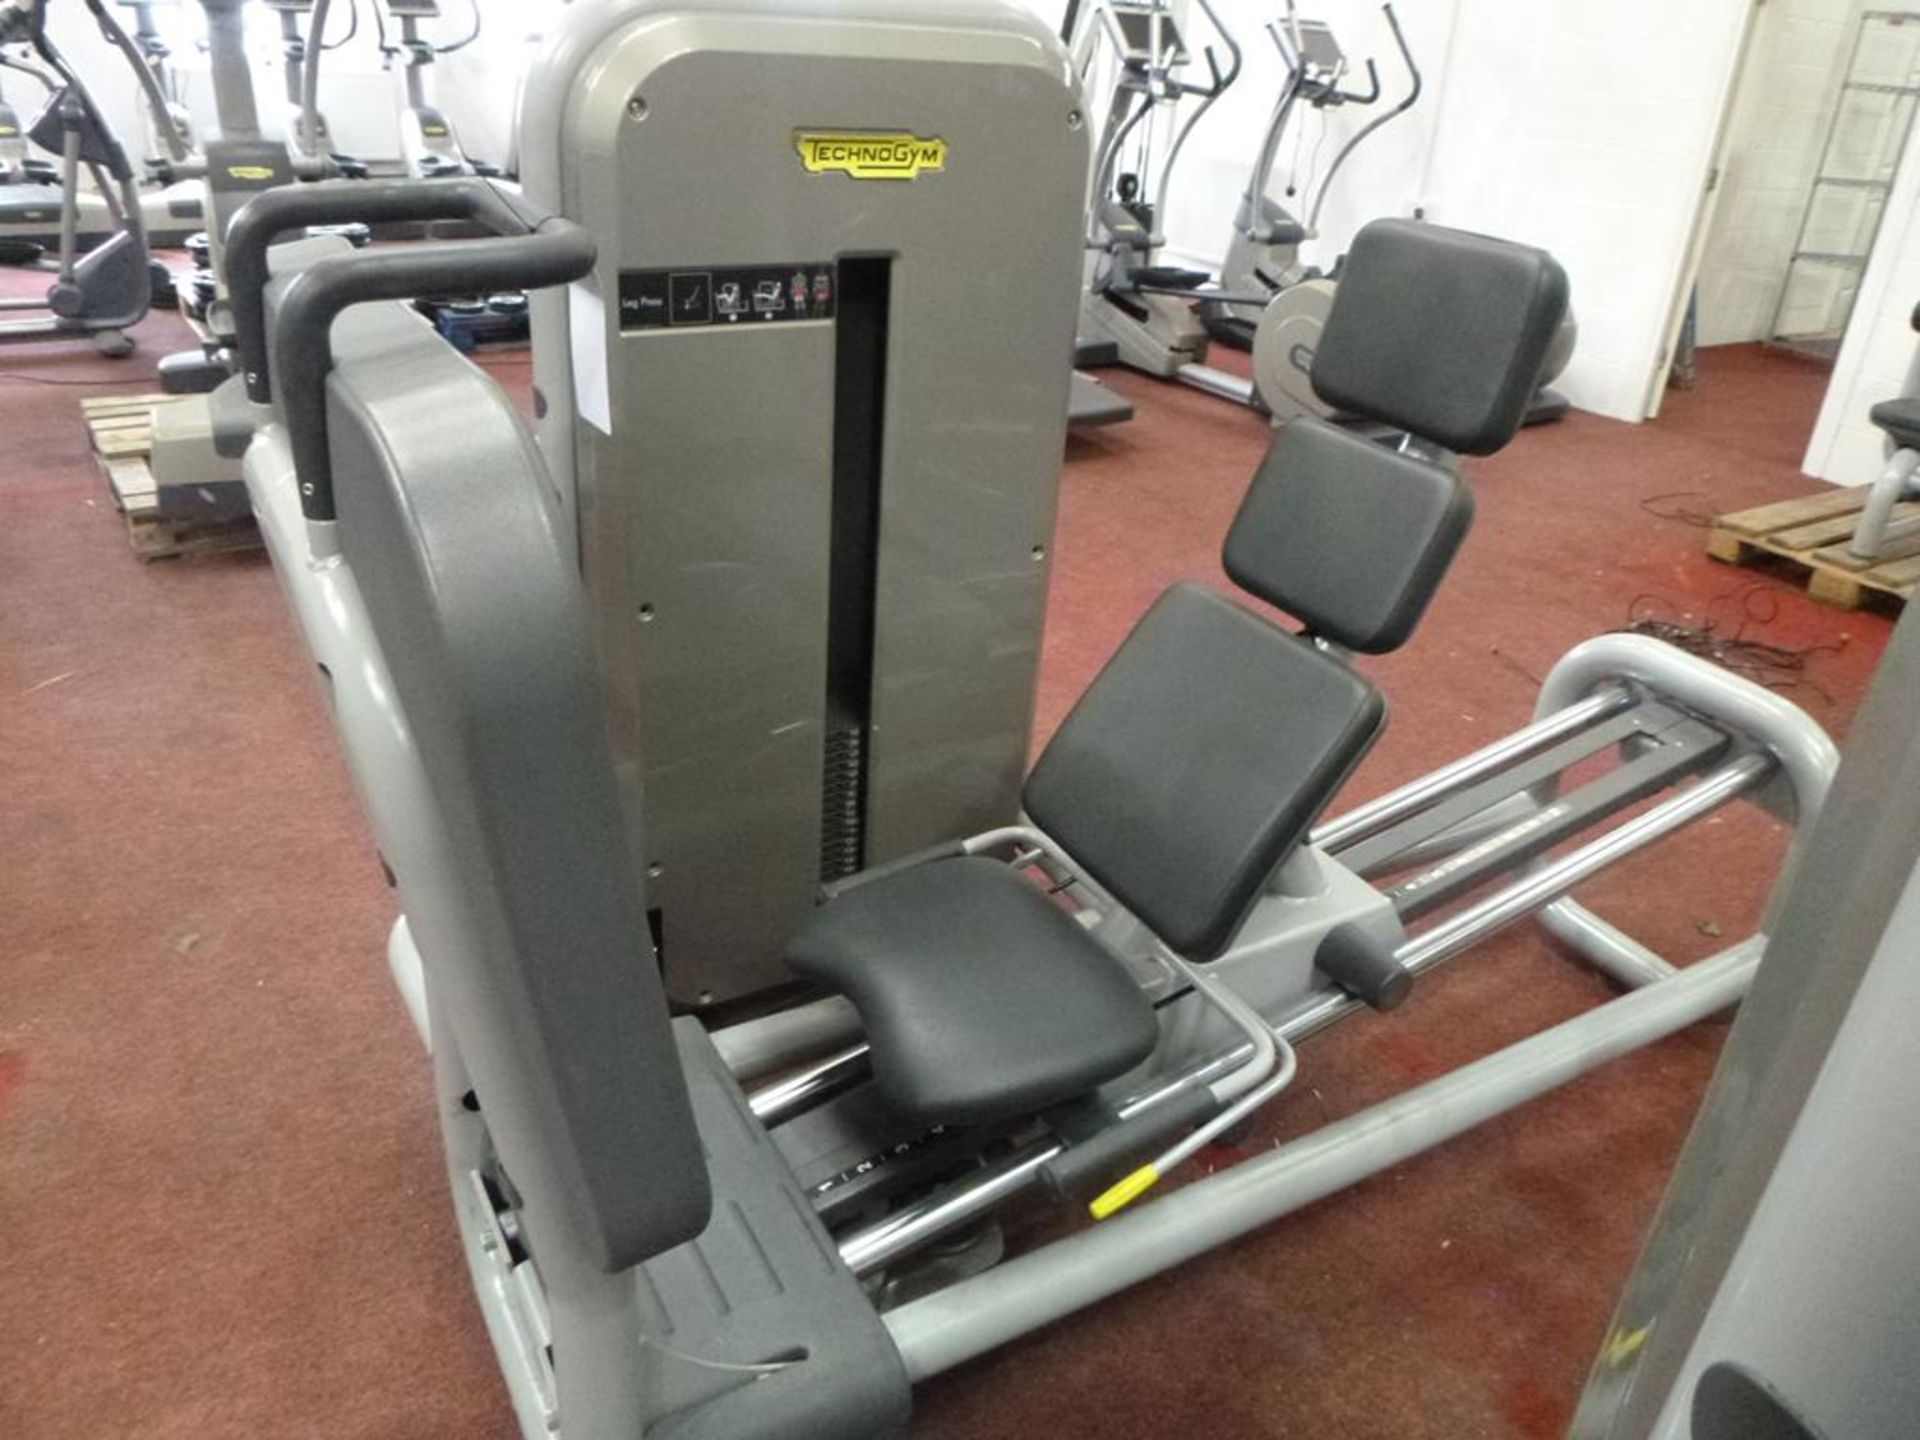 * A TechnoGym Leg Press s/n CB5013100025 YOM 09/14 200Kg Weight Stack. Please note that this lot - Image 2 of 4